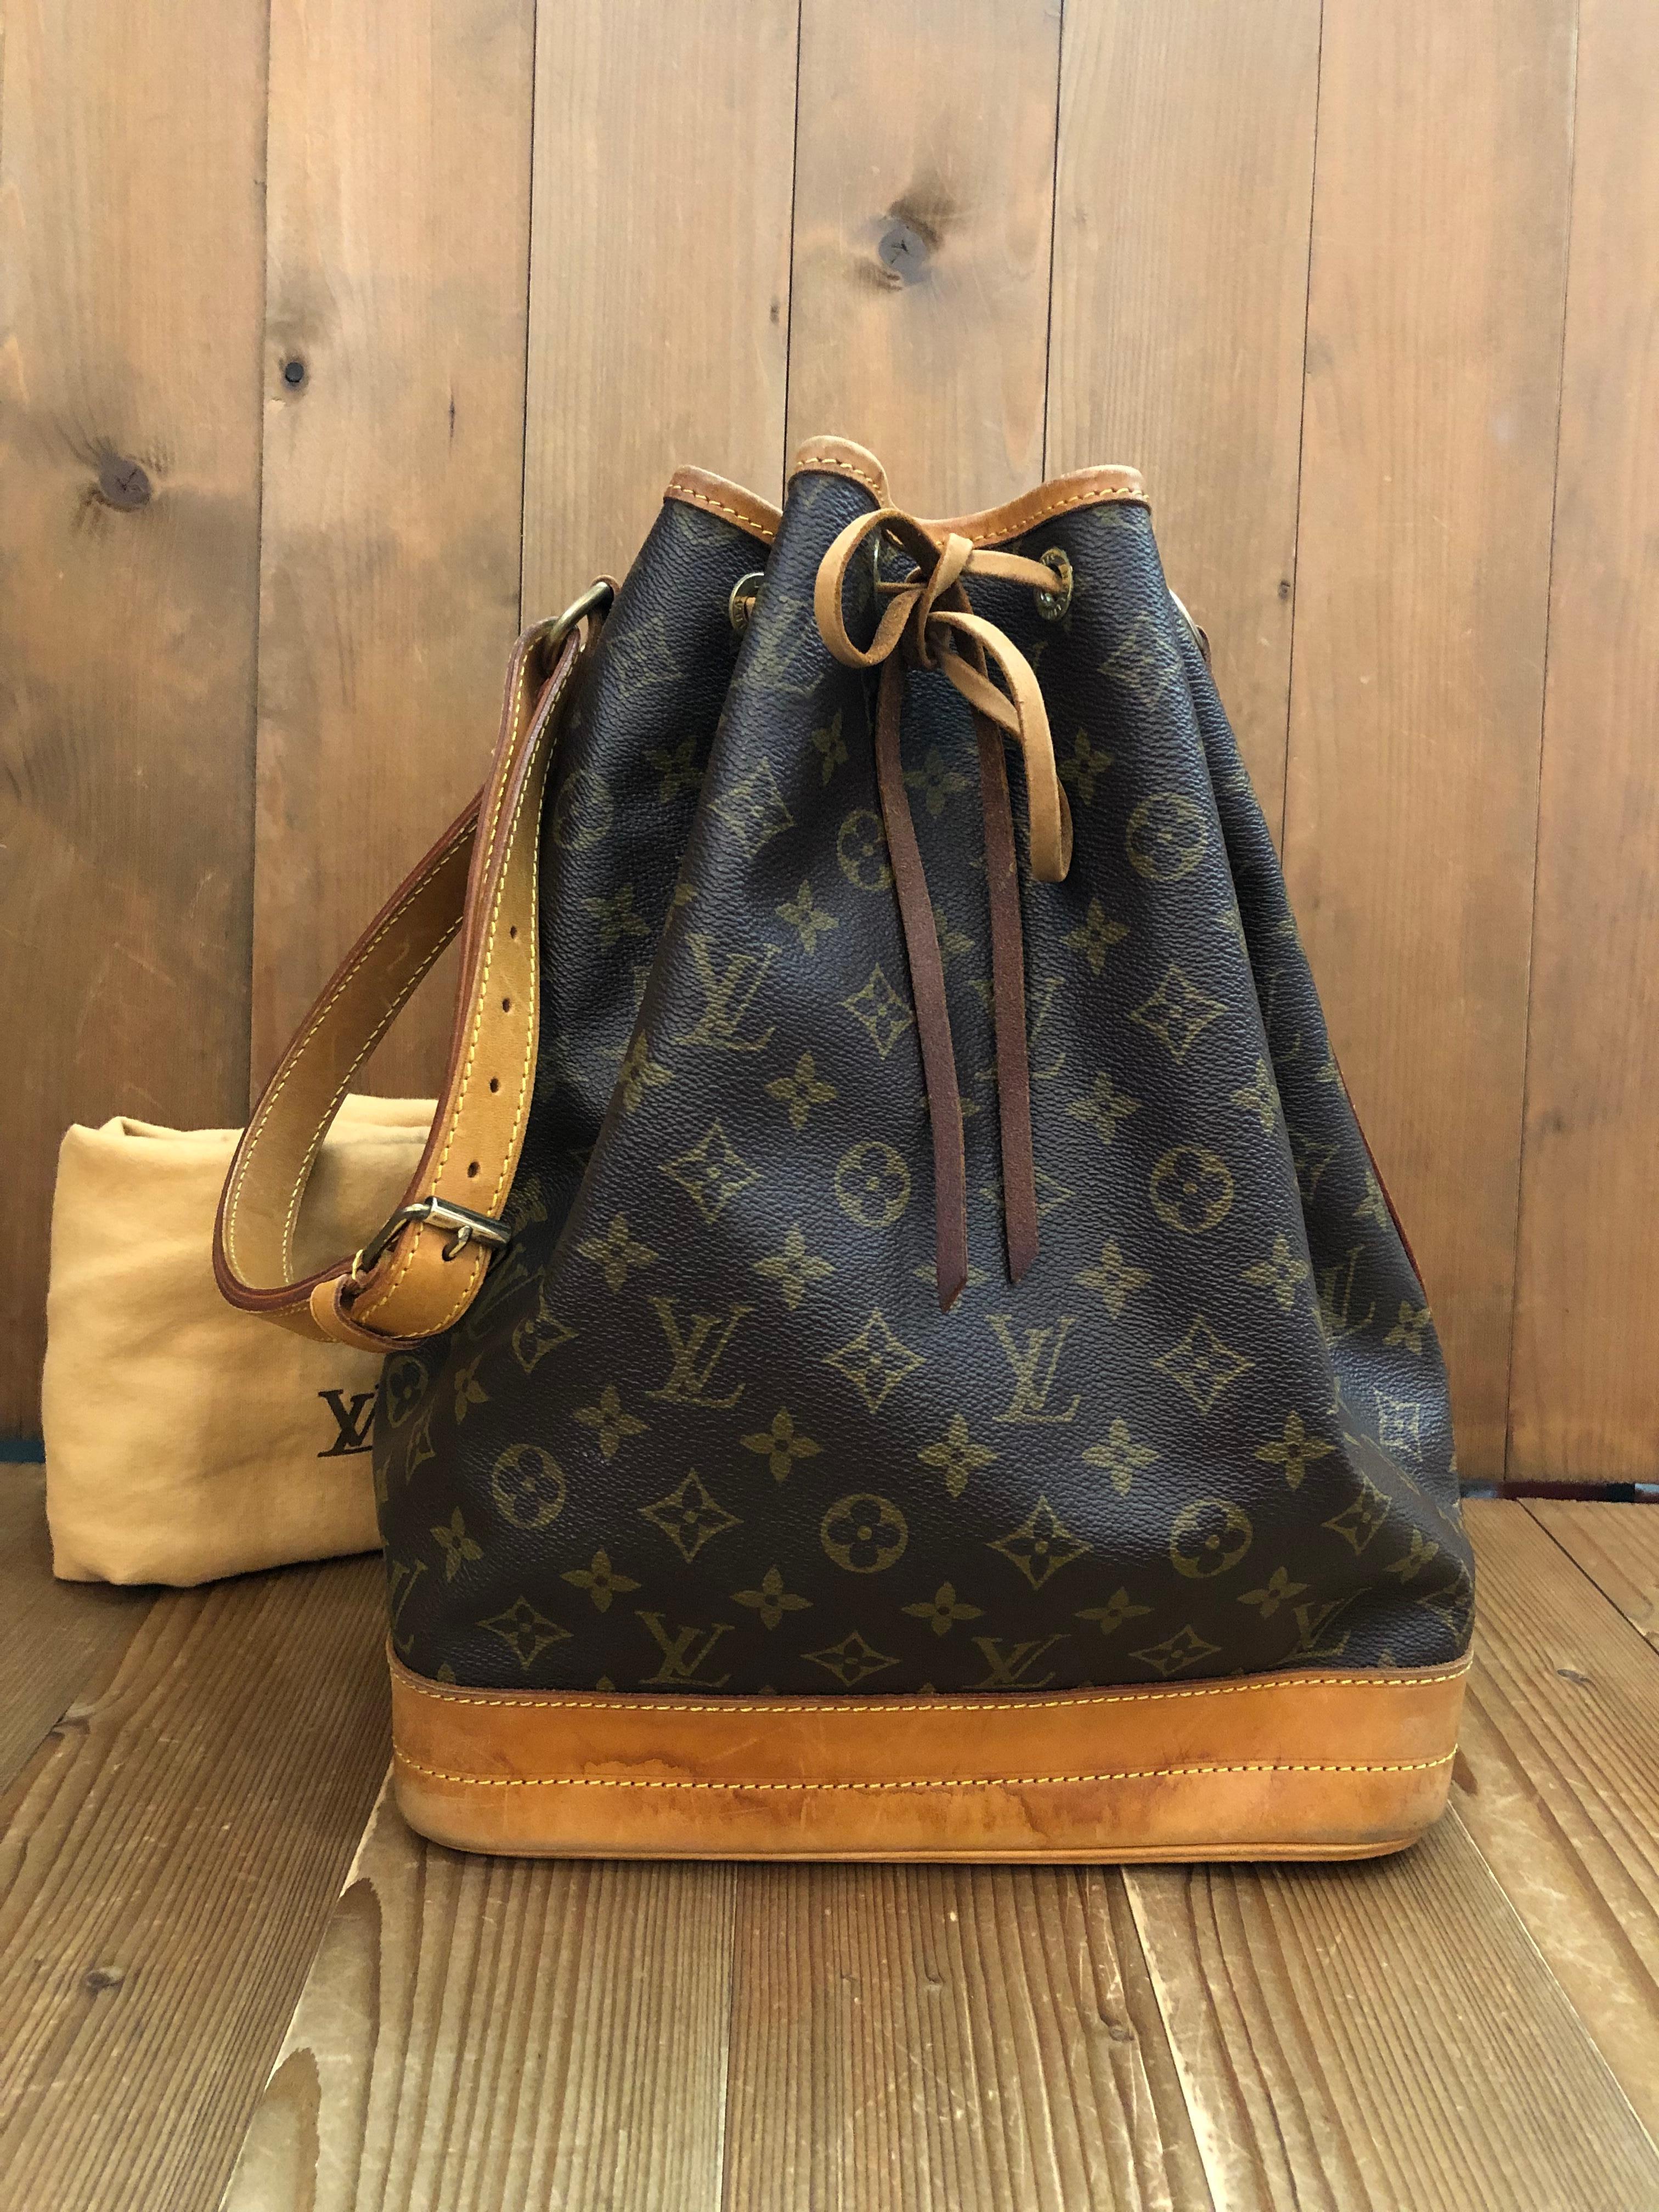 This vintage LOUIS VUITTON Noe GM shoulder bag is crafted of Louis Vuitton’s monogram canvas and vachetta leather. 
Noe was originally created in 1932 to carry bottles of Champagne. Made in France with date-code A2 8905. Measures 10.5 x 13.75 x 7.5